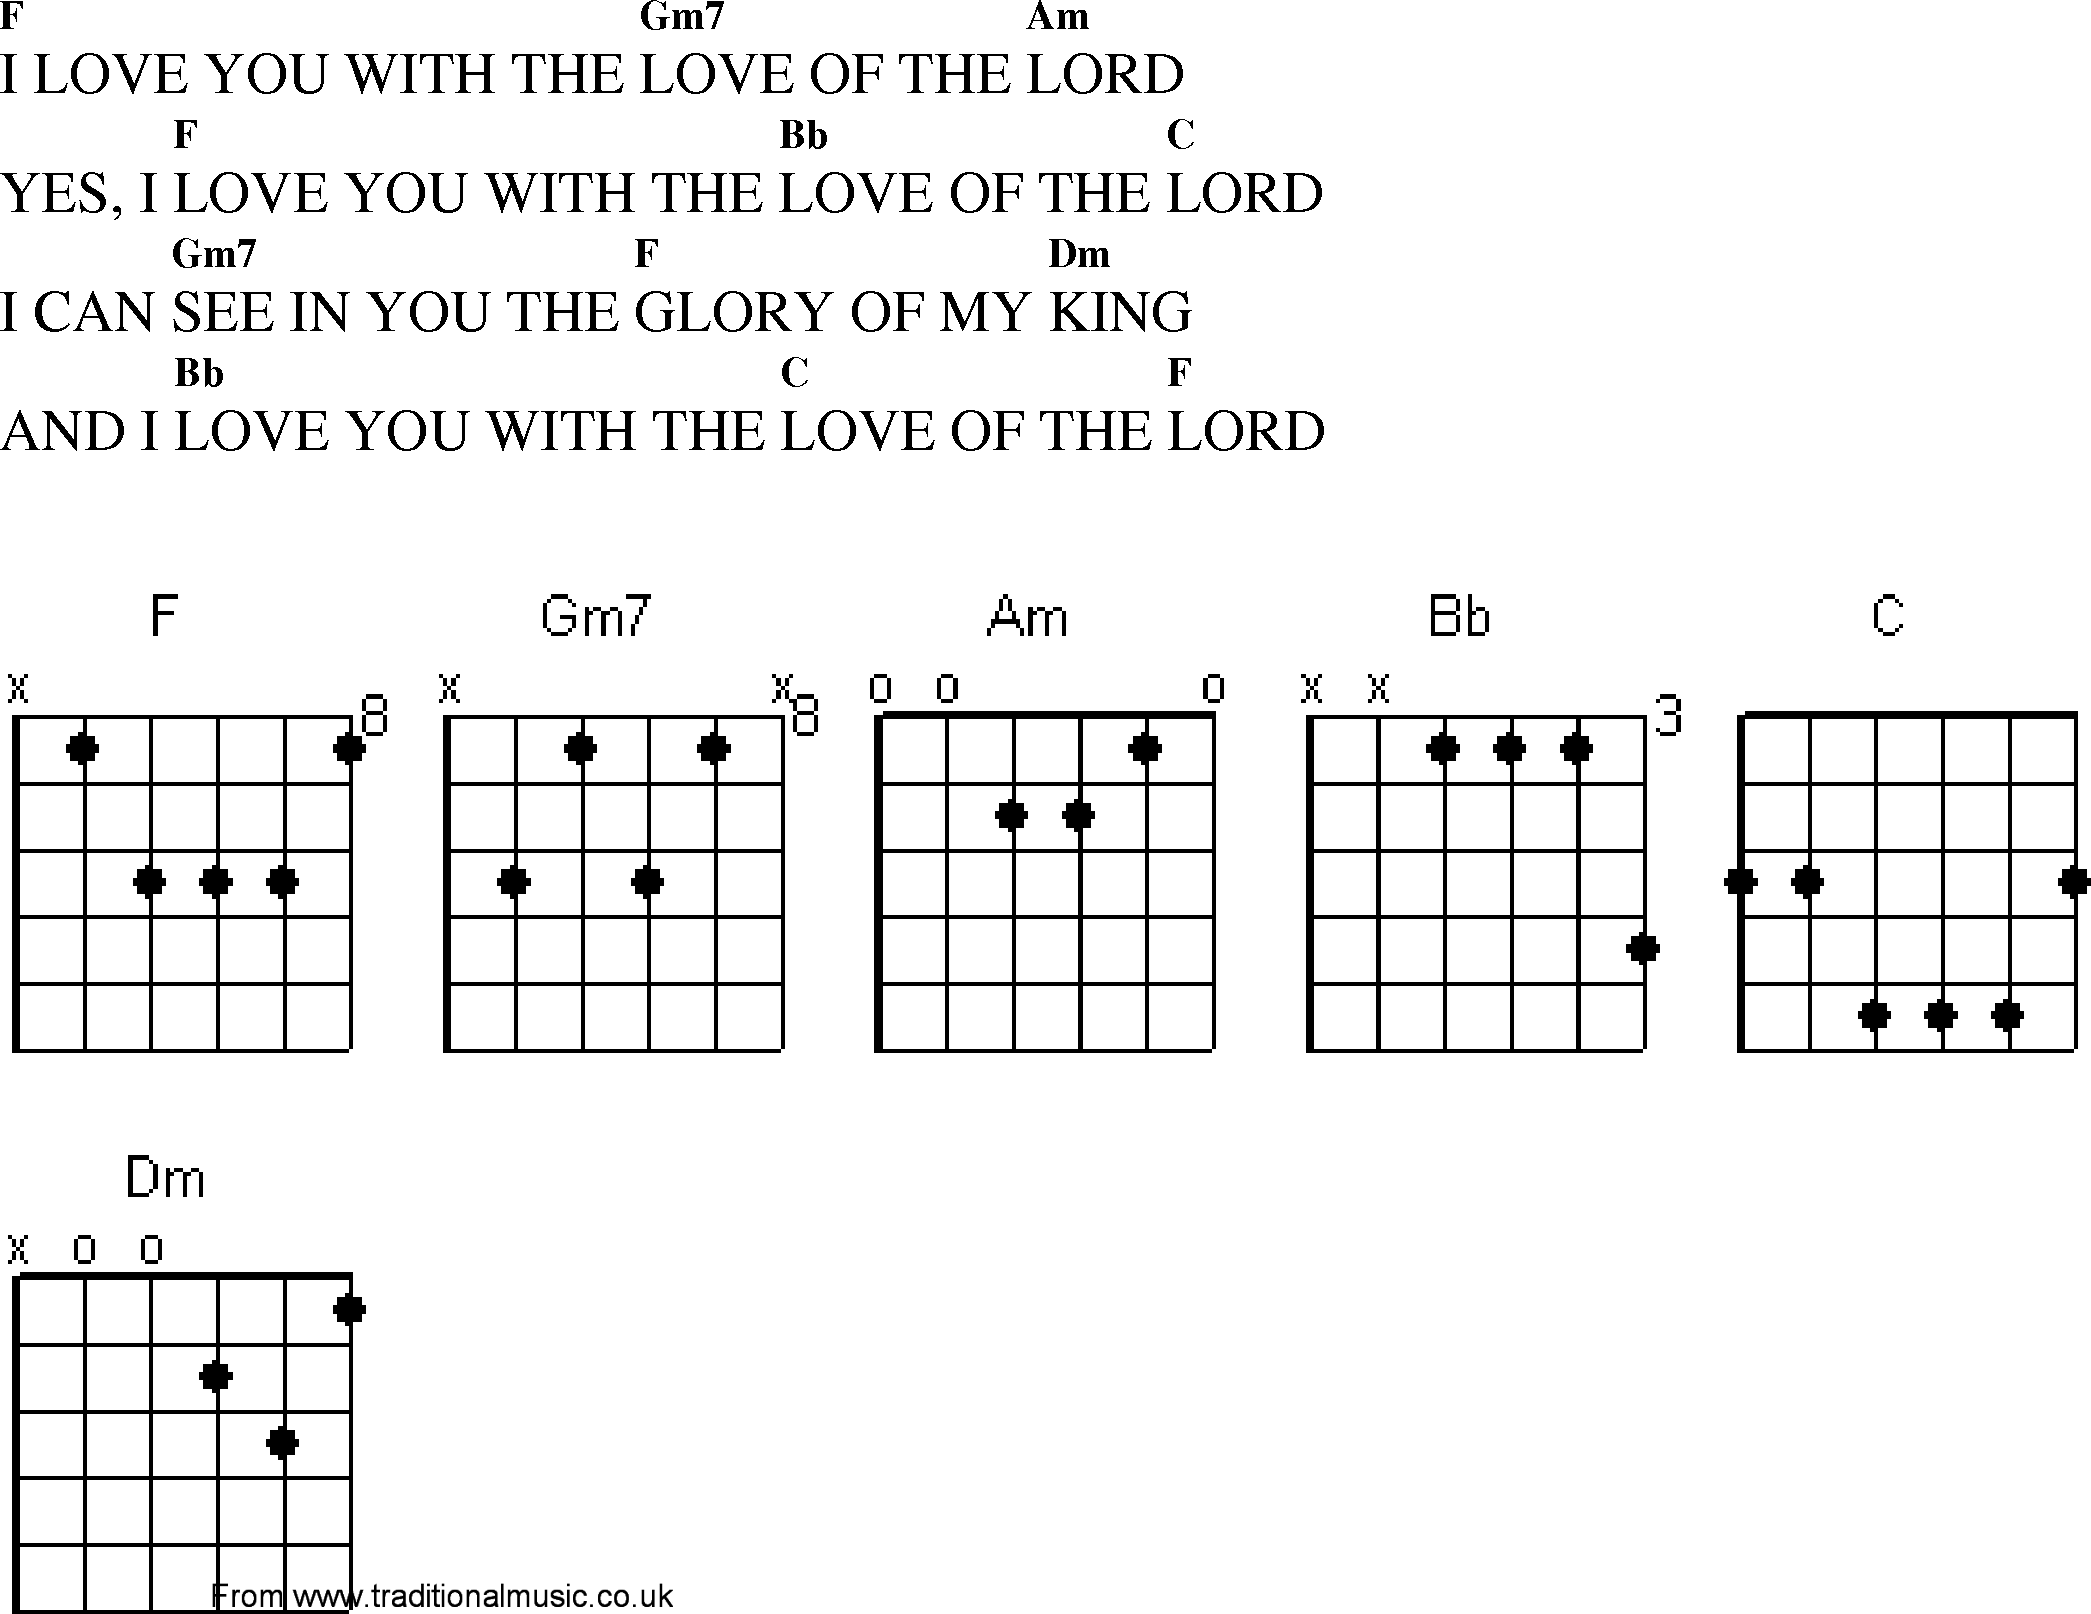 Gospel Song: i_love_you_with_the_love_of_the_lord, lyrics and chords.